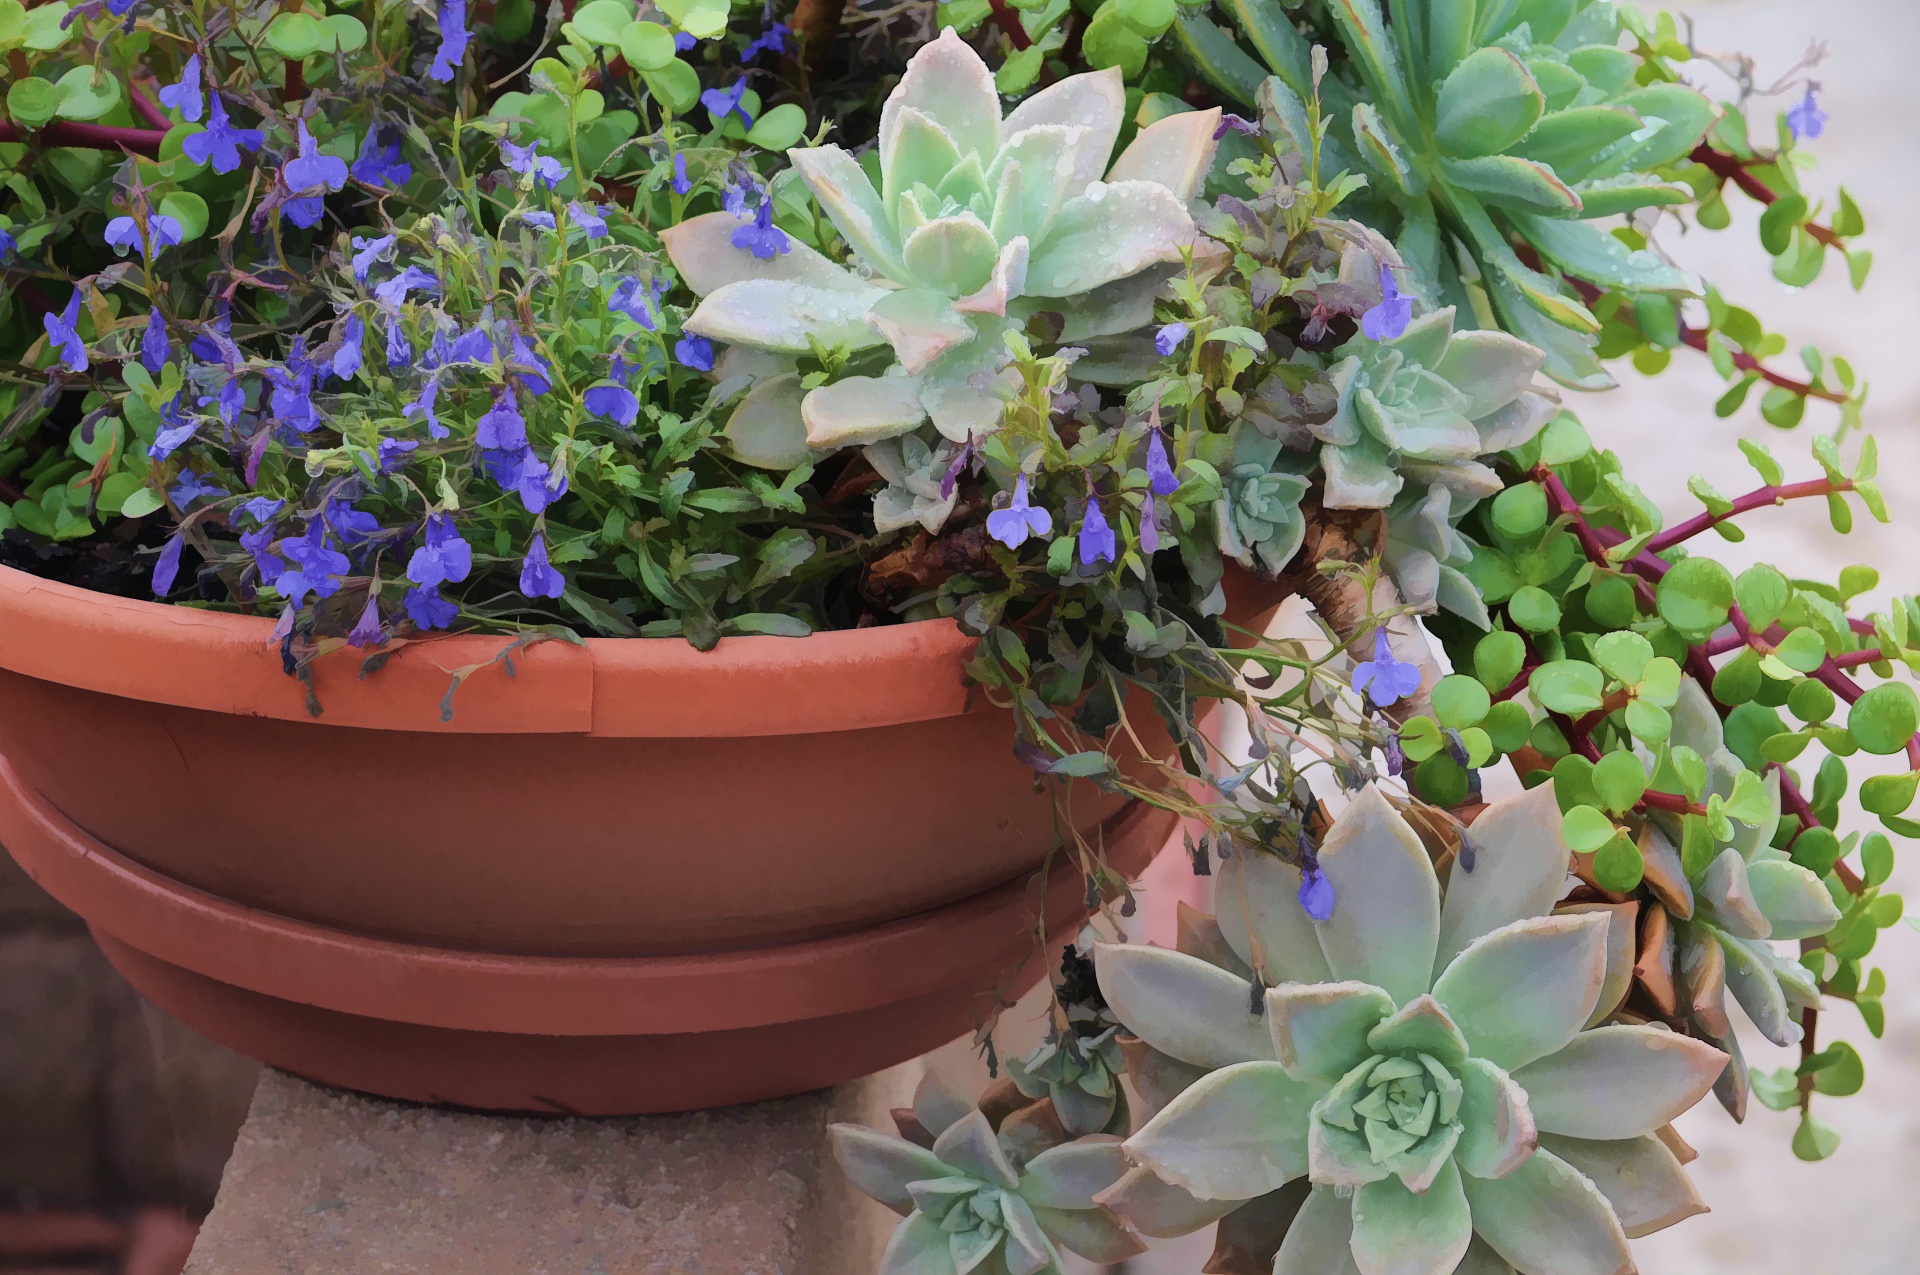 artistic touch applied to photo of a planter with succulents and tiny purple flowers freeimage, publicdomain, CC0